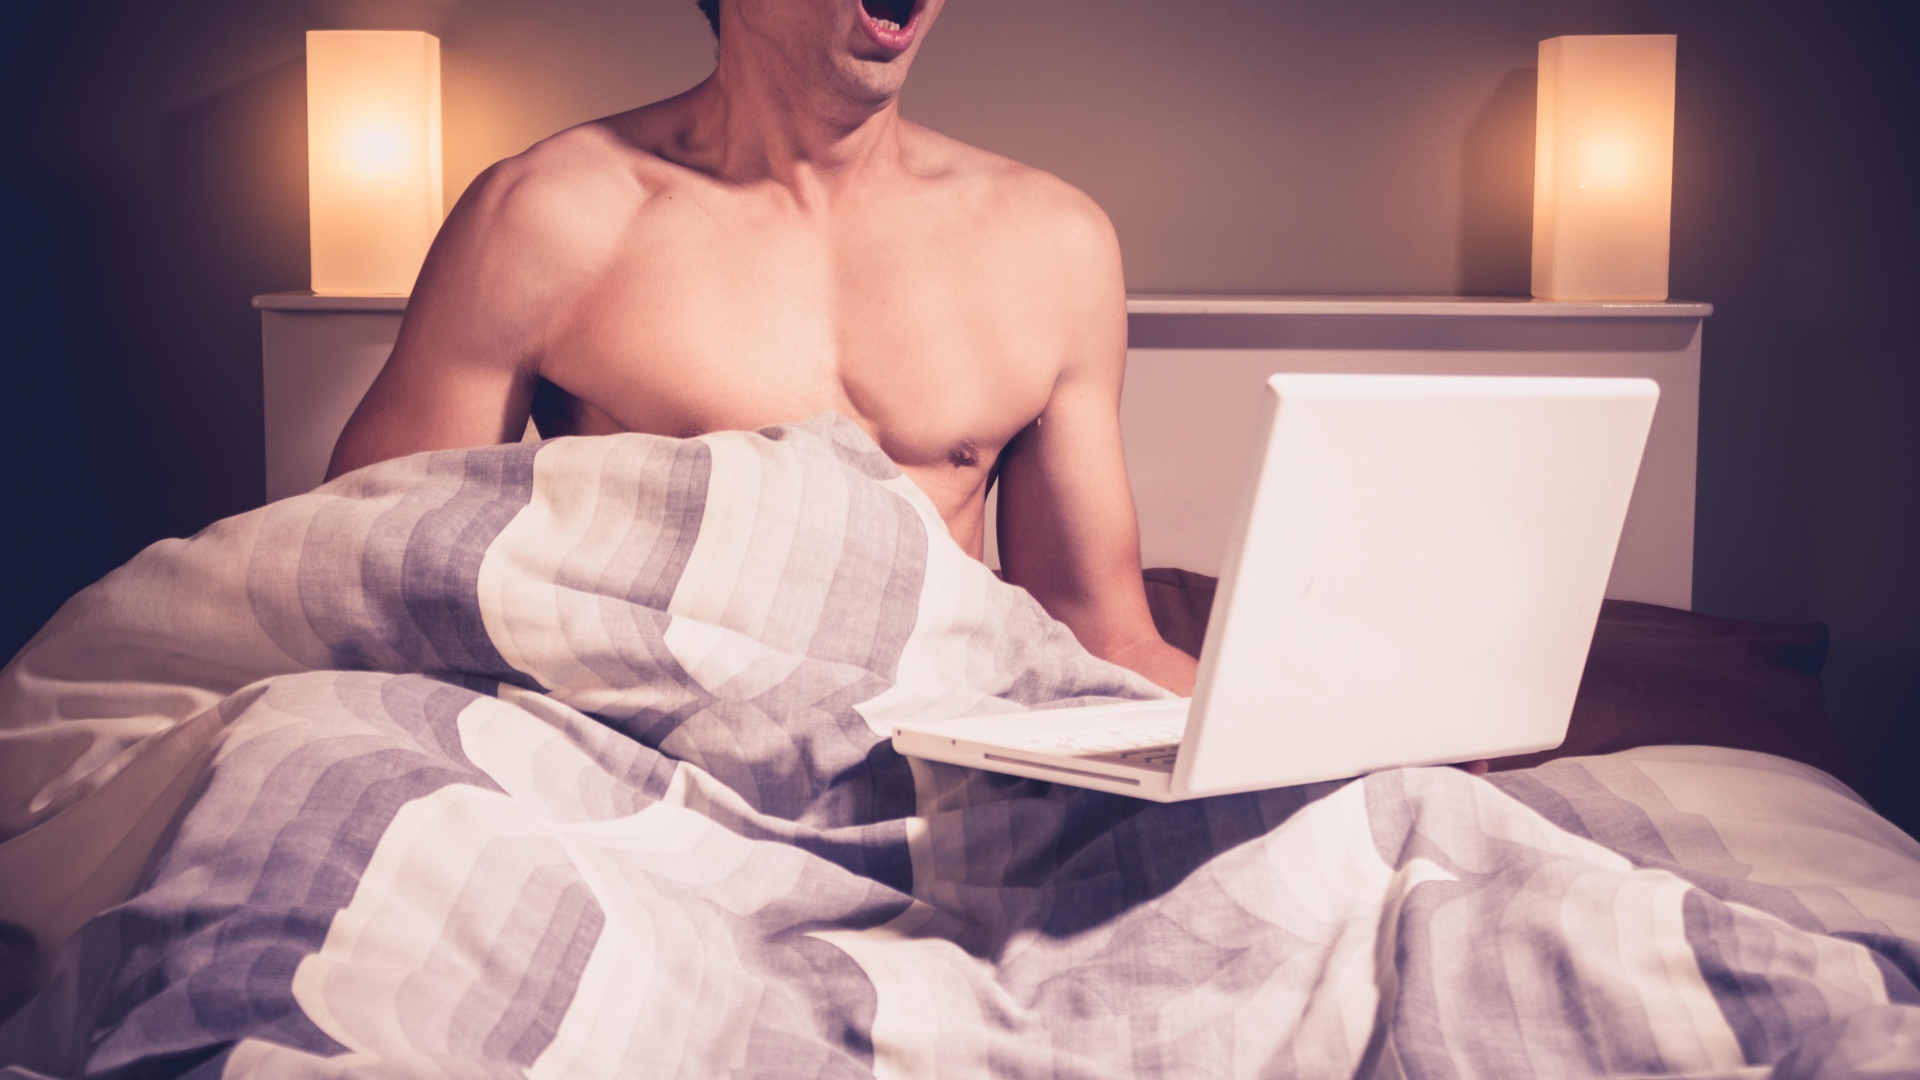 What to Do If Your Spouse Catches You Watching Porn?